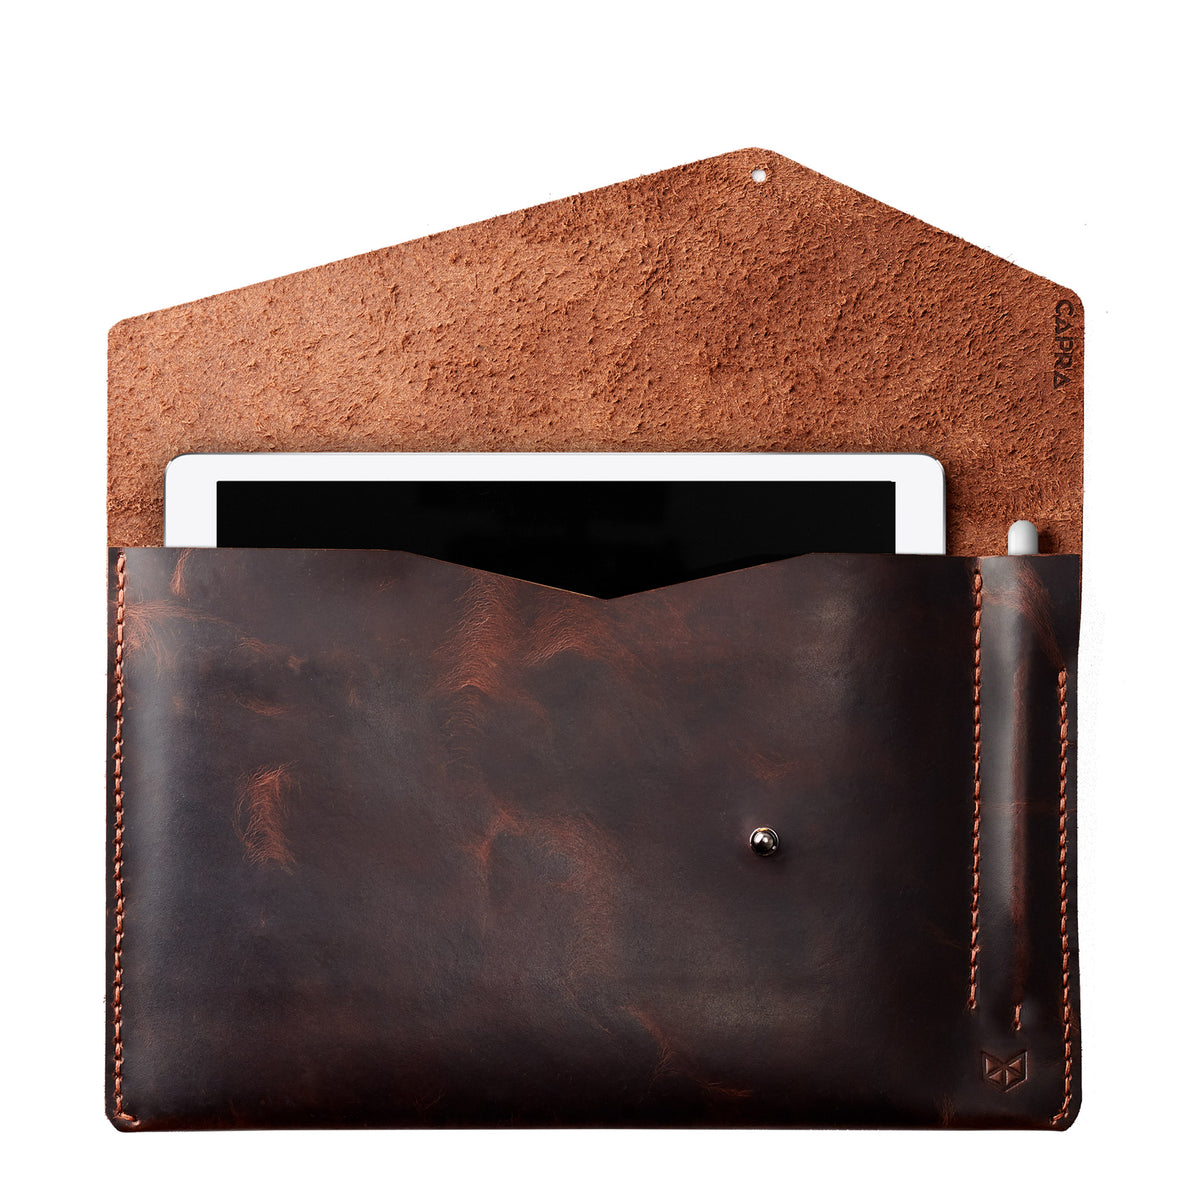 iPad Sleeve. iPad Leather Case Distressed Cognac With Apple Pencil Holder by Capra Leather